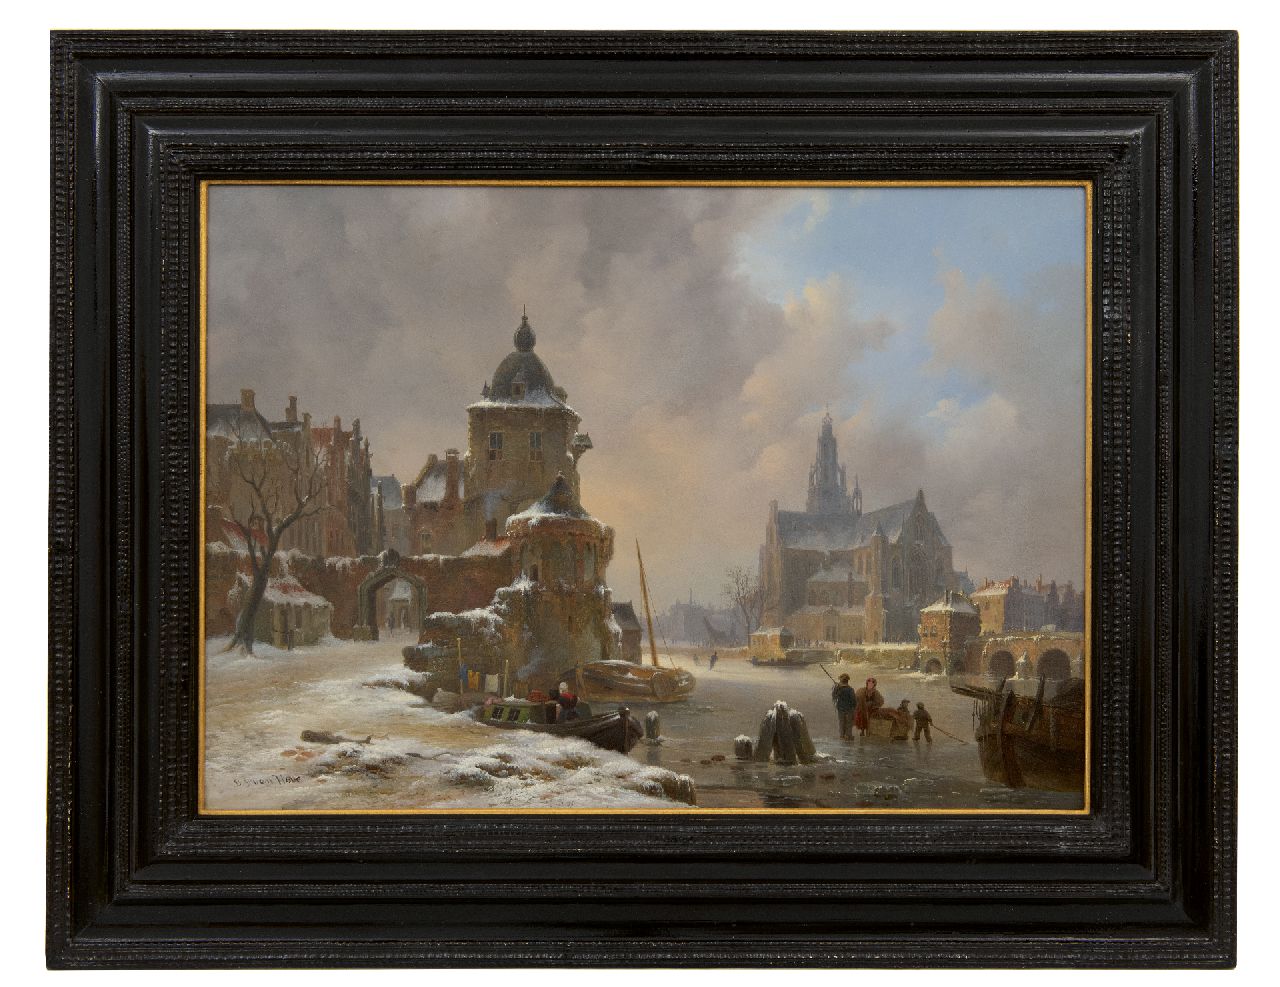 Hove B.J. van | Bartholomeus Johannes 'Bart' van Hove | Paintings offered for sale | A town view in winter with frozen waterway, oil on panel 34.2 x 48.5 cm, signed l.l.